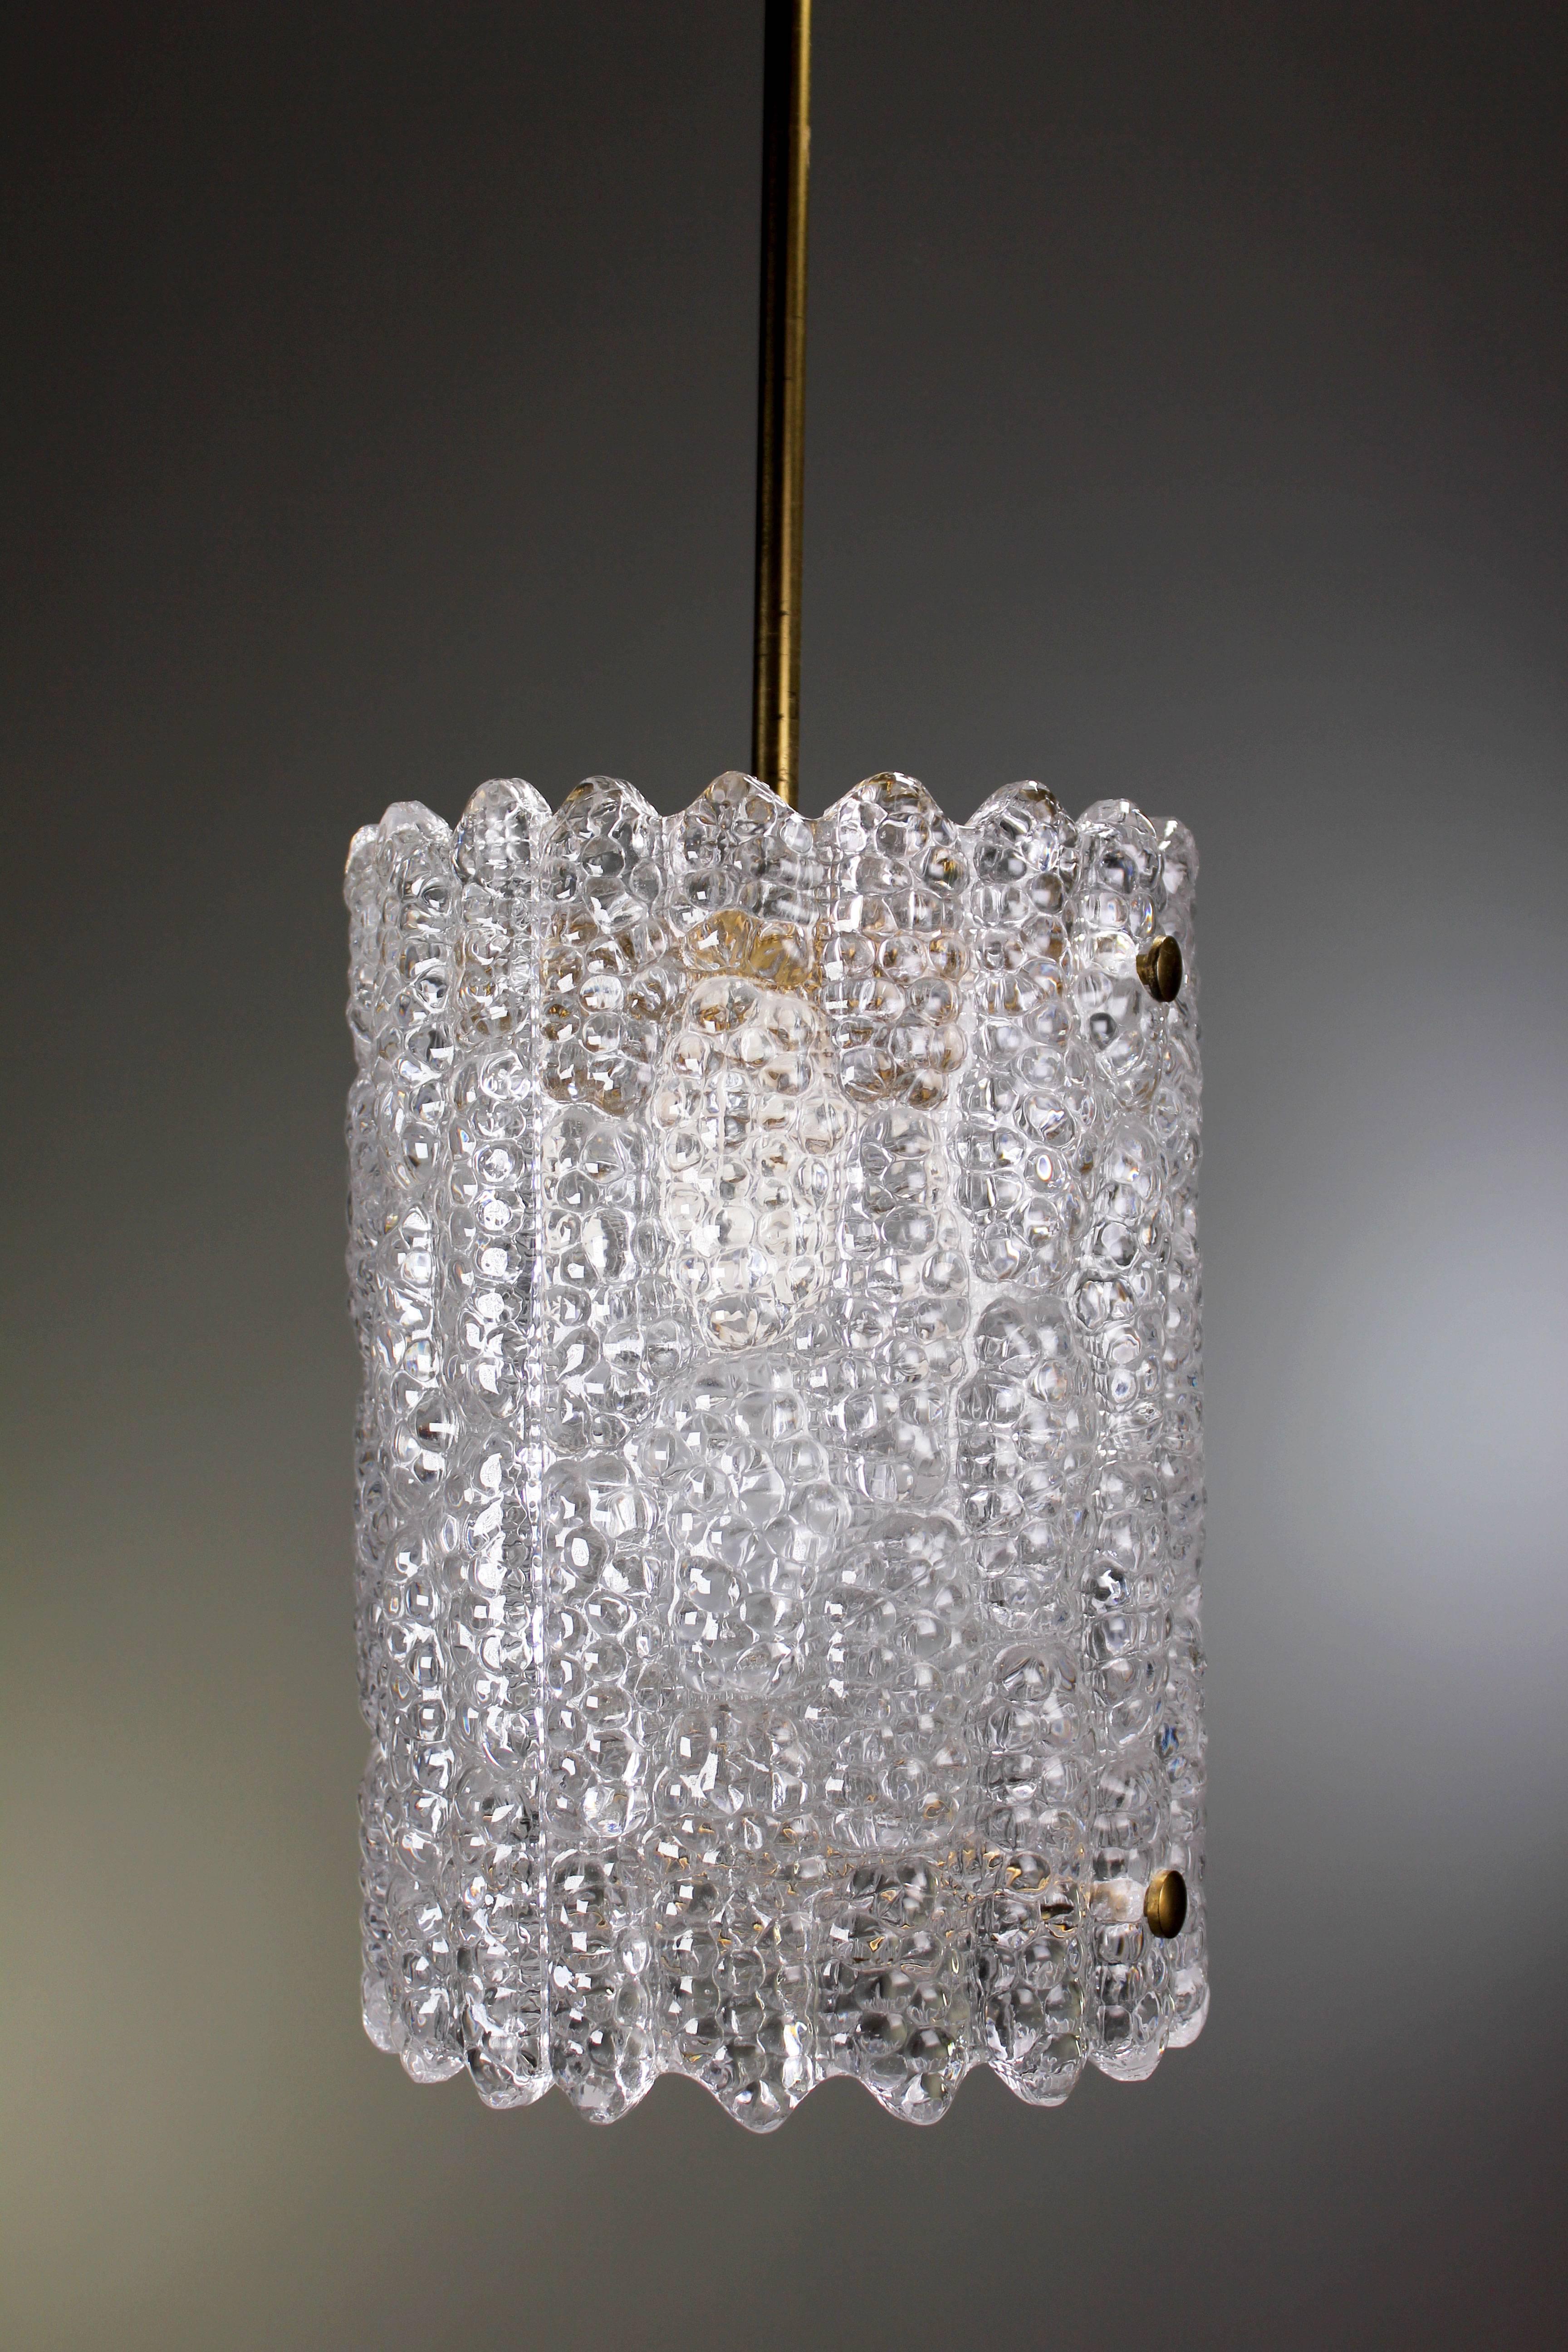 Stunning midcentury Scandinavian modern cylinder pendant by Swedish designer Carl Fagerlund for Orrefors Glasbruk. Clear textured crystal with scalloped edges. Original brass hardware, slender stem and canopy. Manufactured in the 1950s in the small